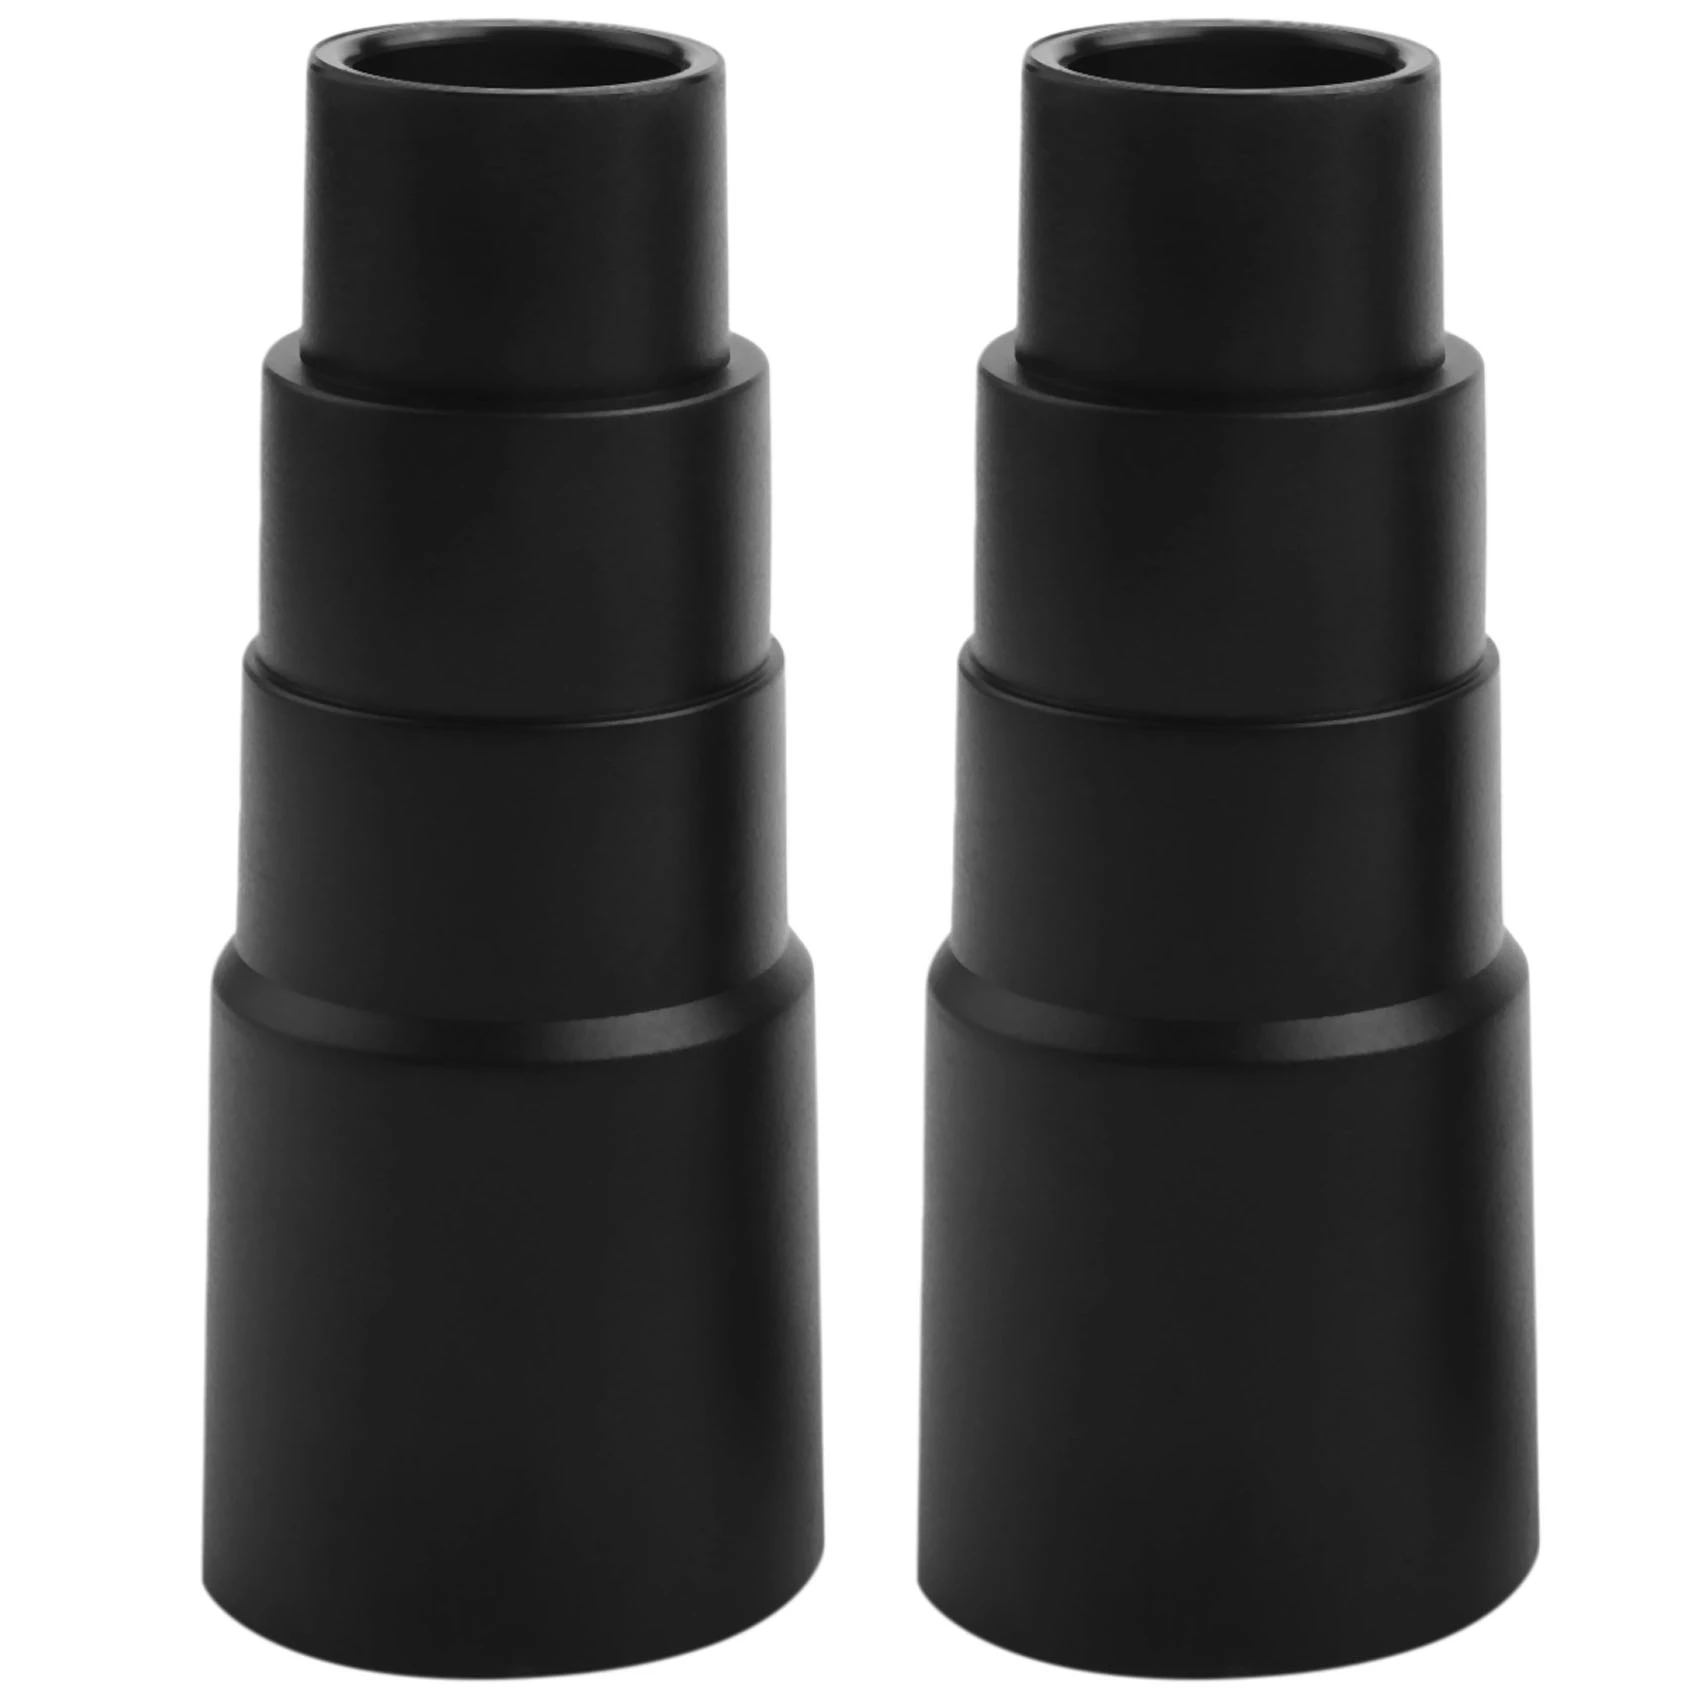 

2Pcs Wet/Dry Vacuum Universal Tool Adapter Designed to Fit More Vacuums and Attachments